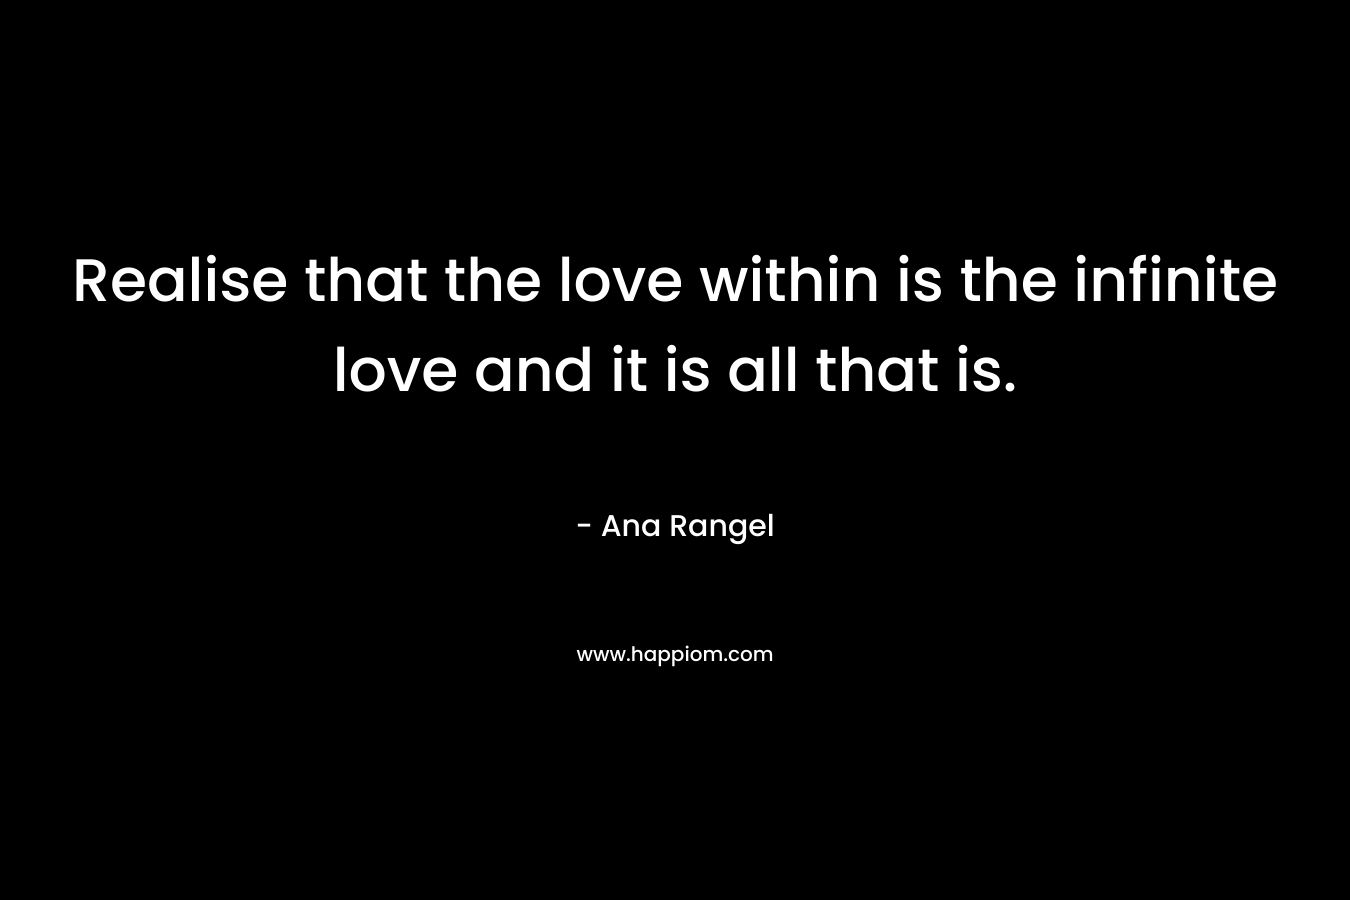 Realise that the love within is the infinite love and it is all that is.